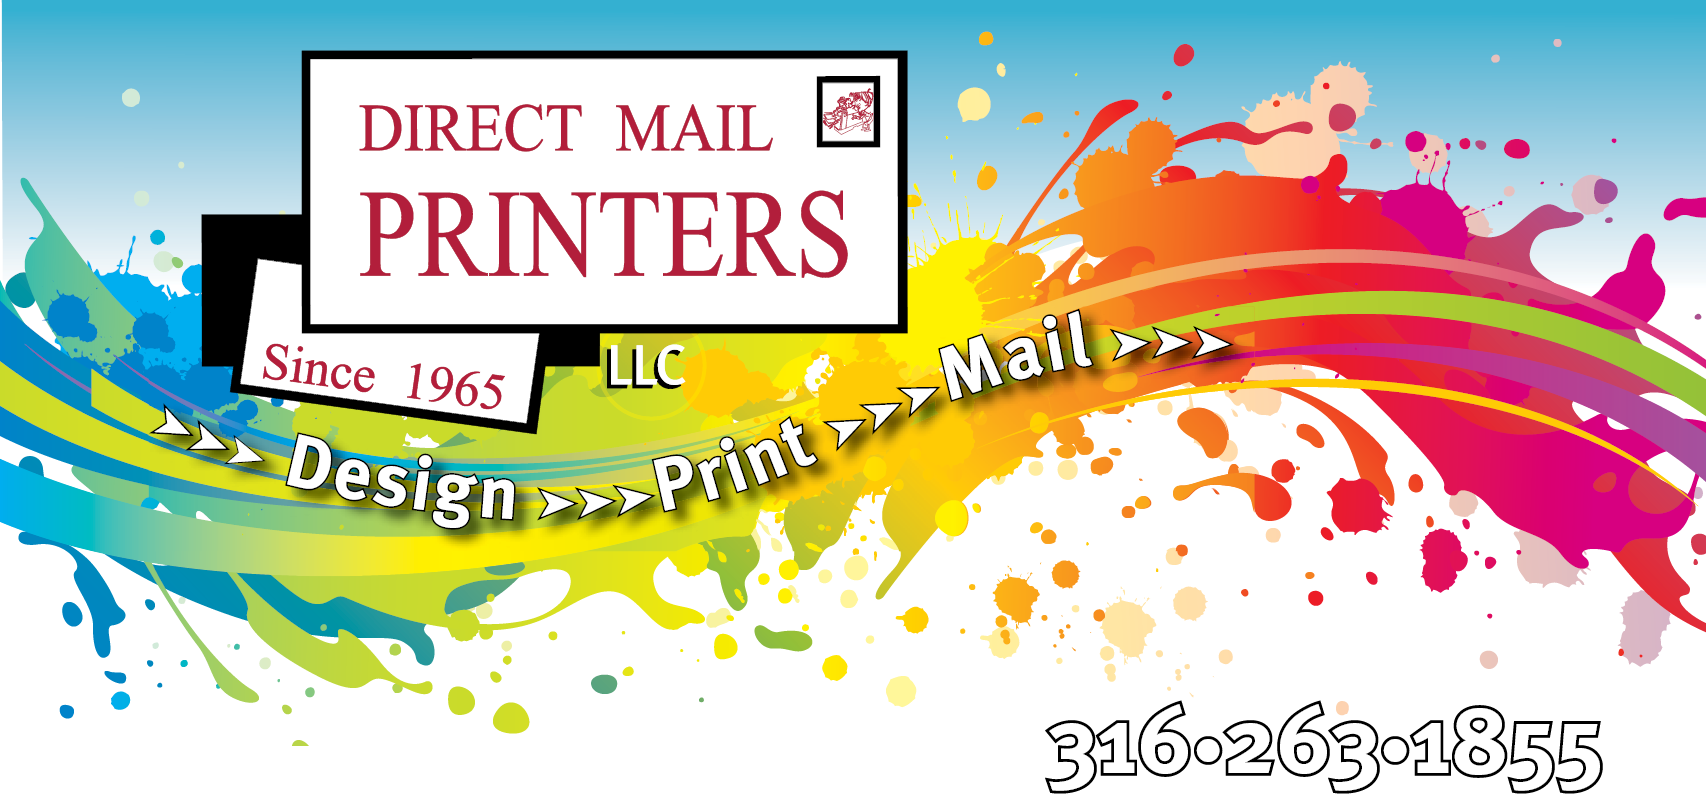 Direct Mail Printers